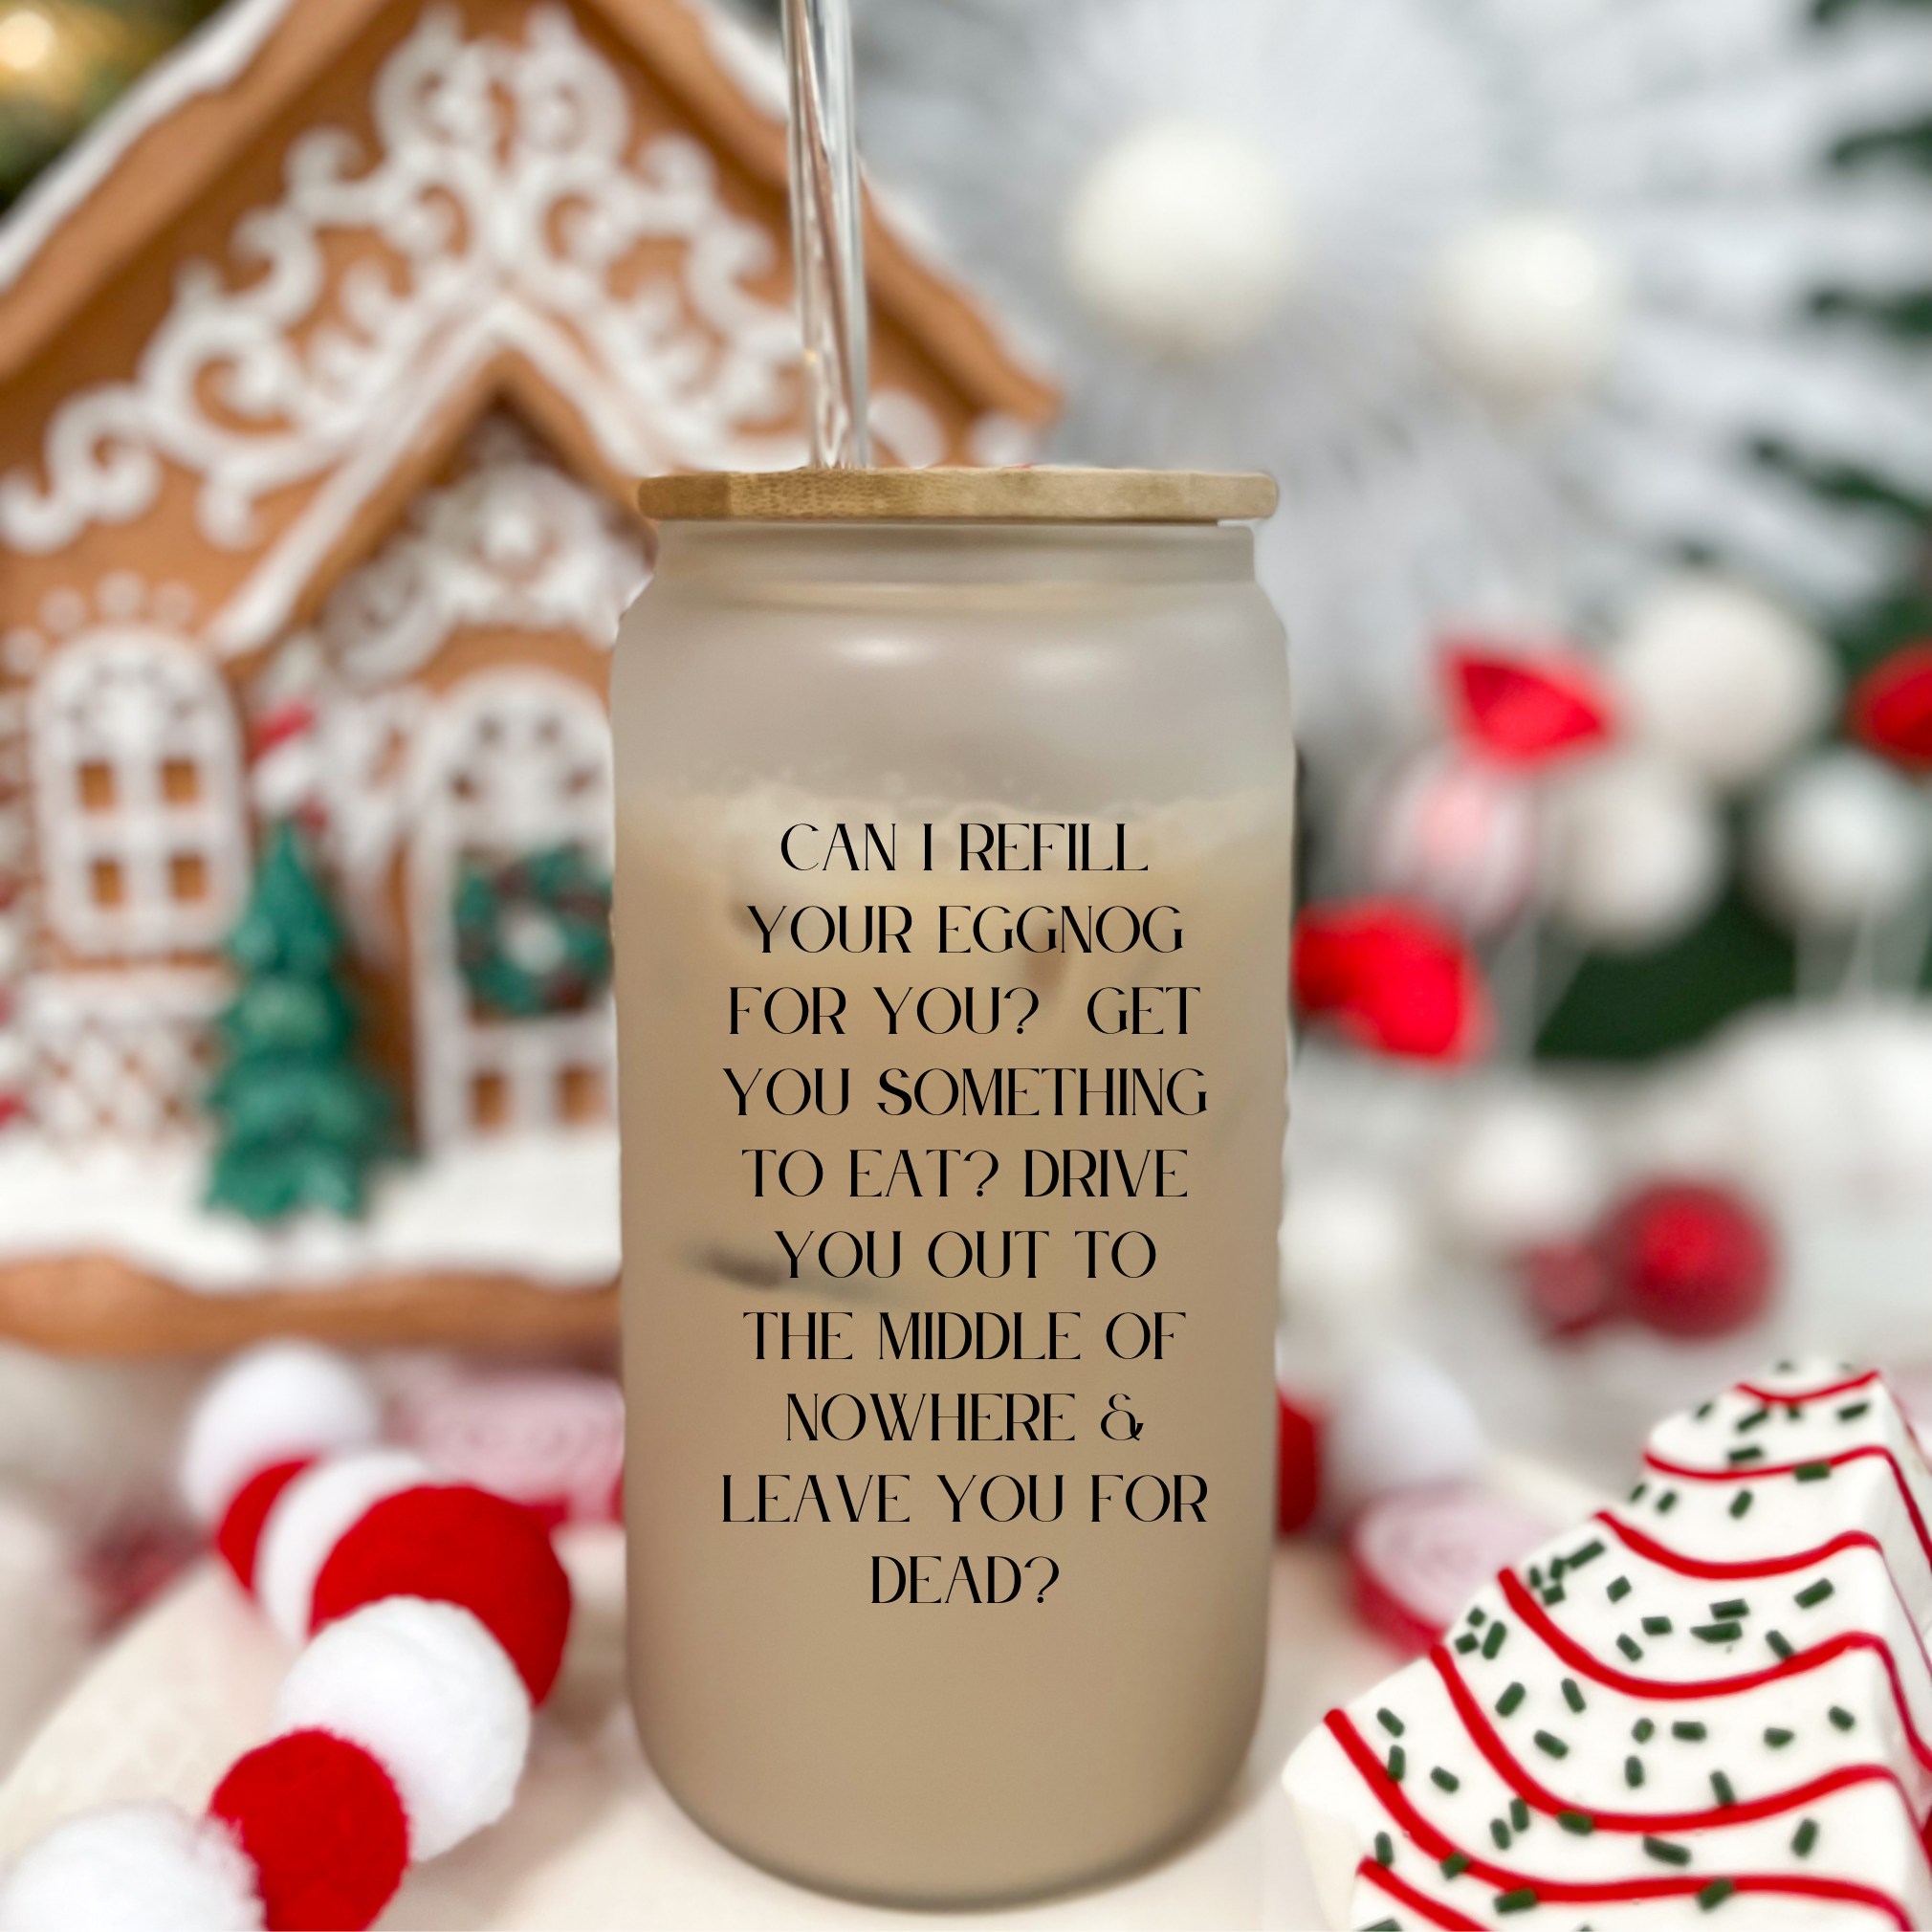 Griswold Eggnog Social Society Frosted Glass Tumbler